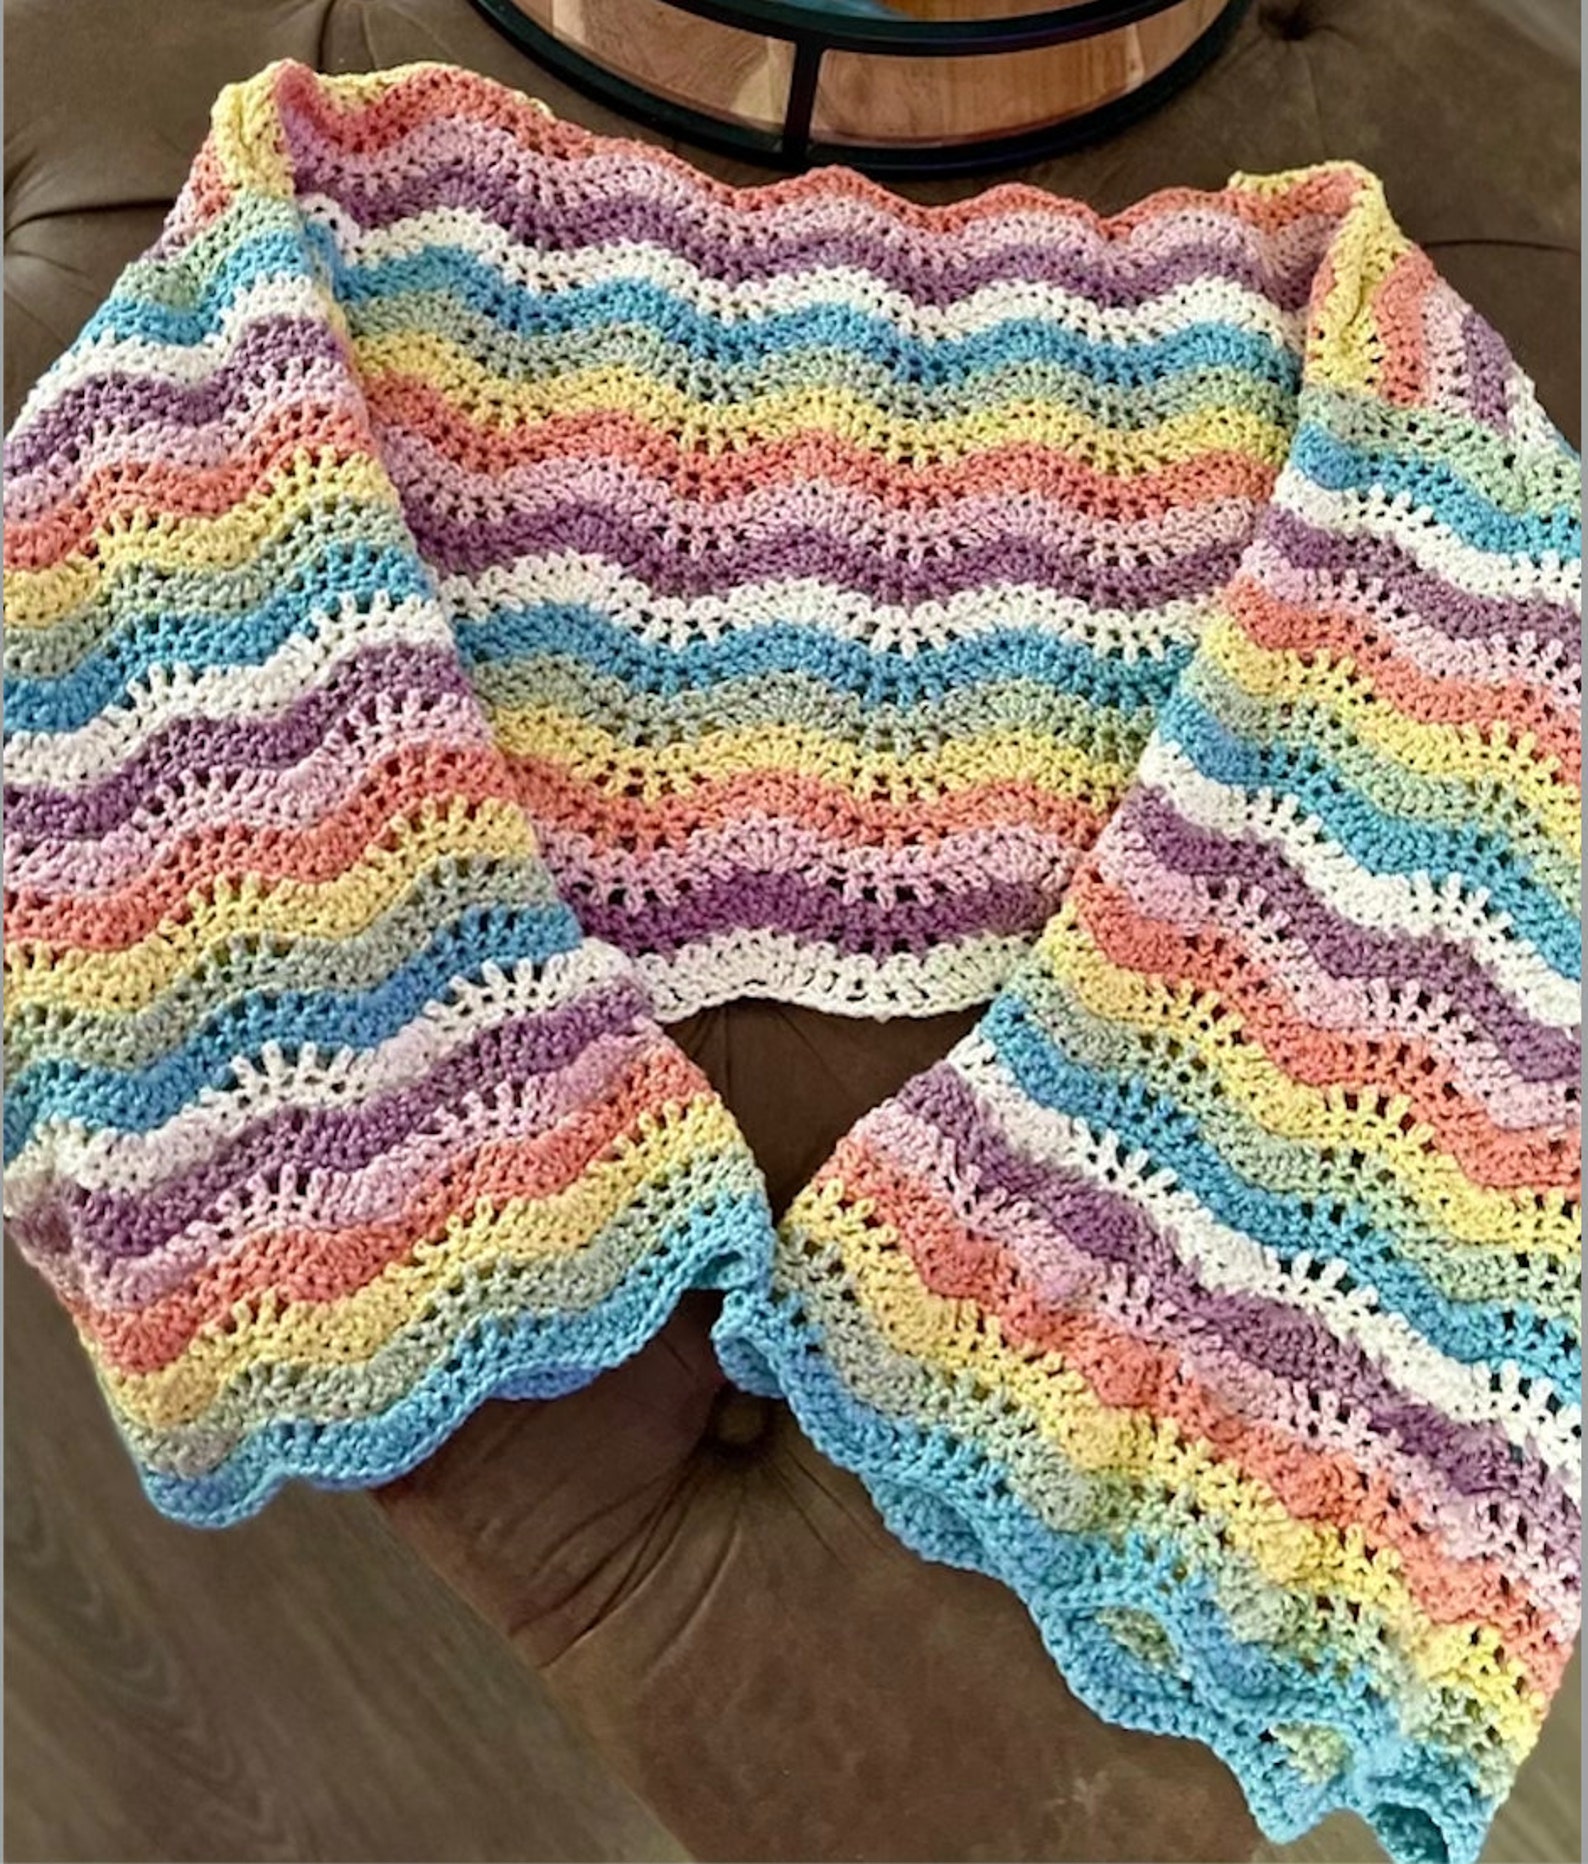 A rainbow-colored sweater. The stripes are wavy.